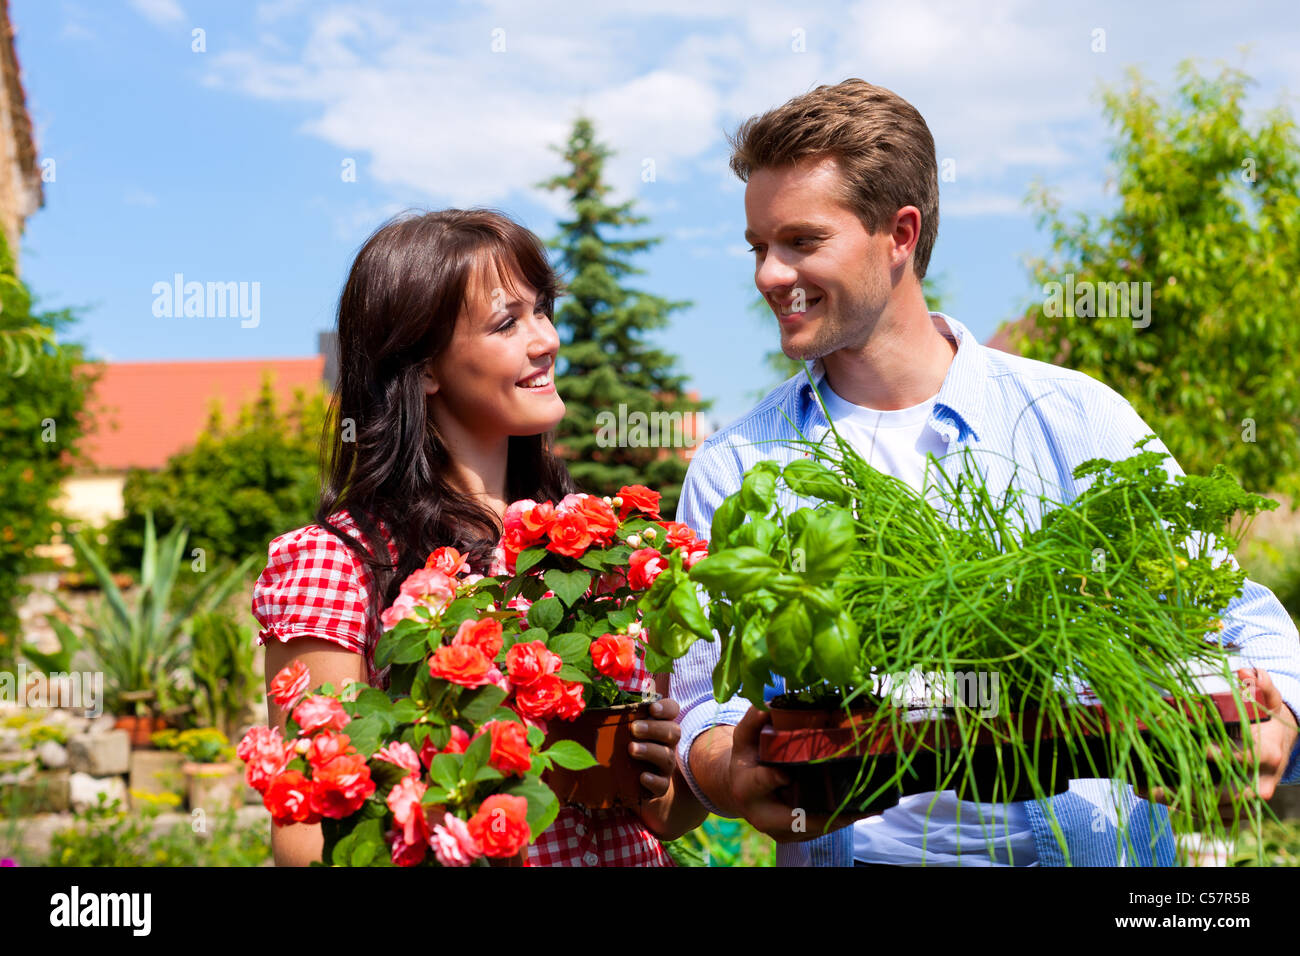 Gardening in summer - happy couple with fresh herbs and red flowers Stock Photo